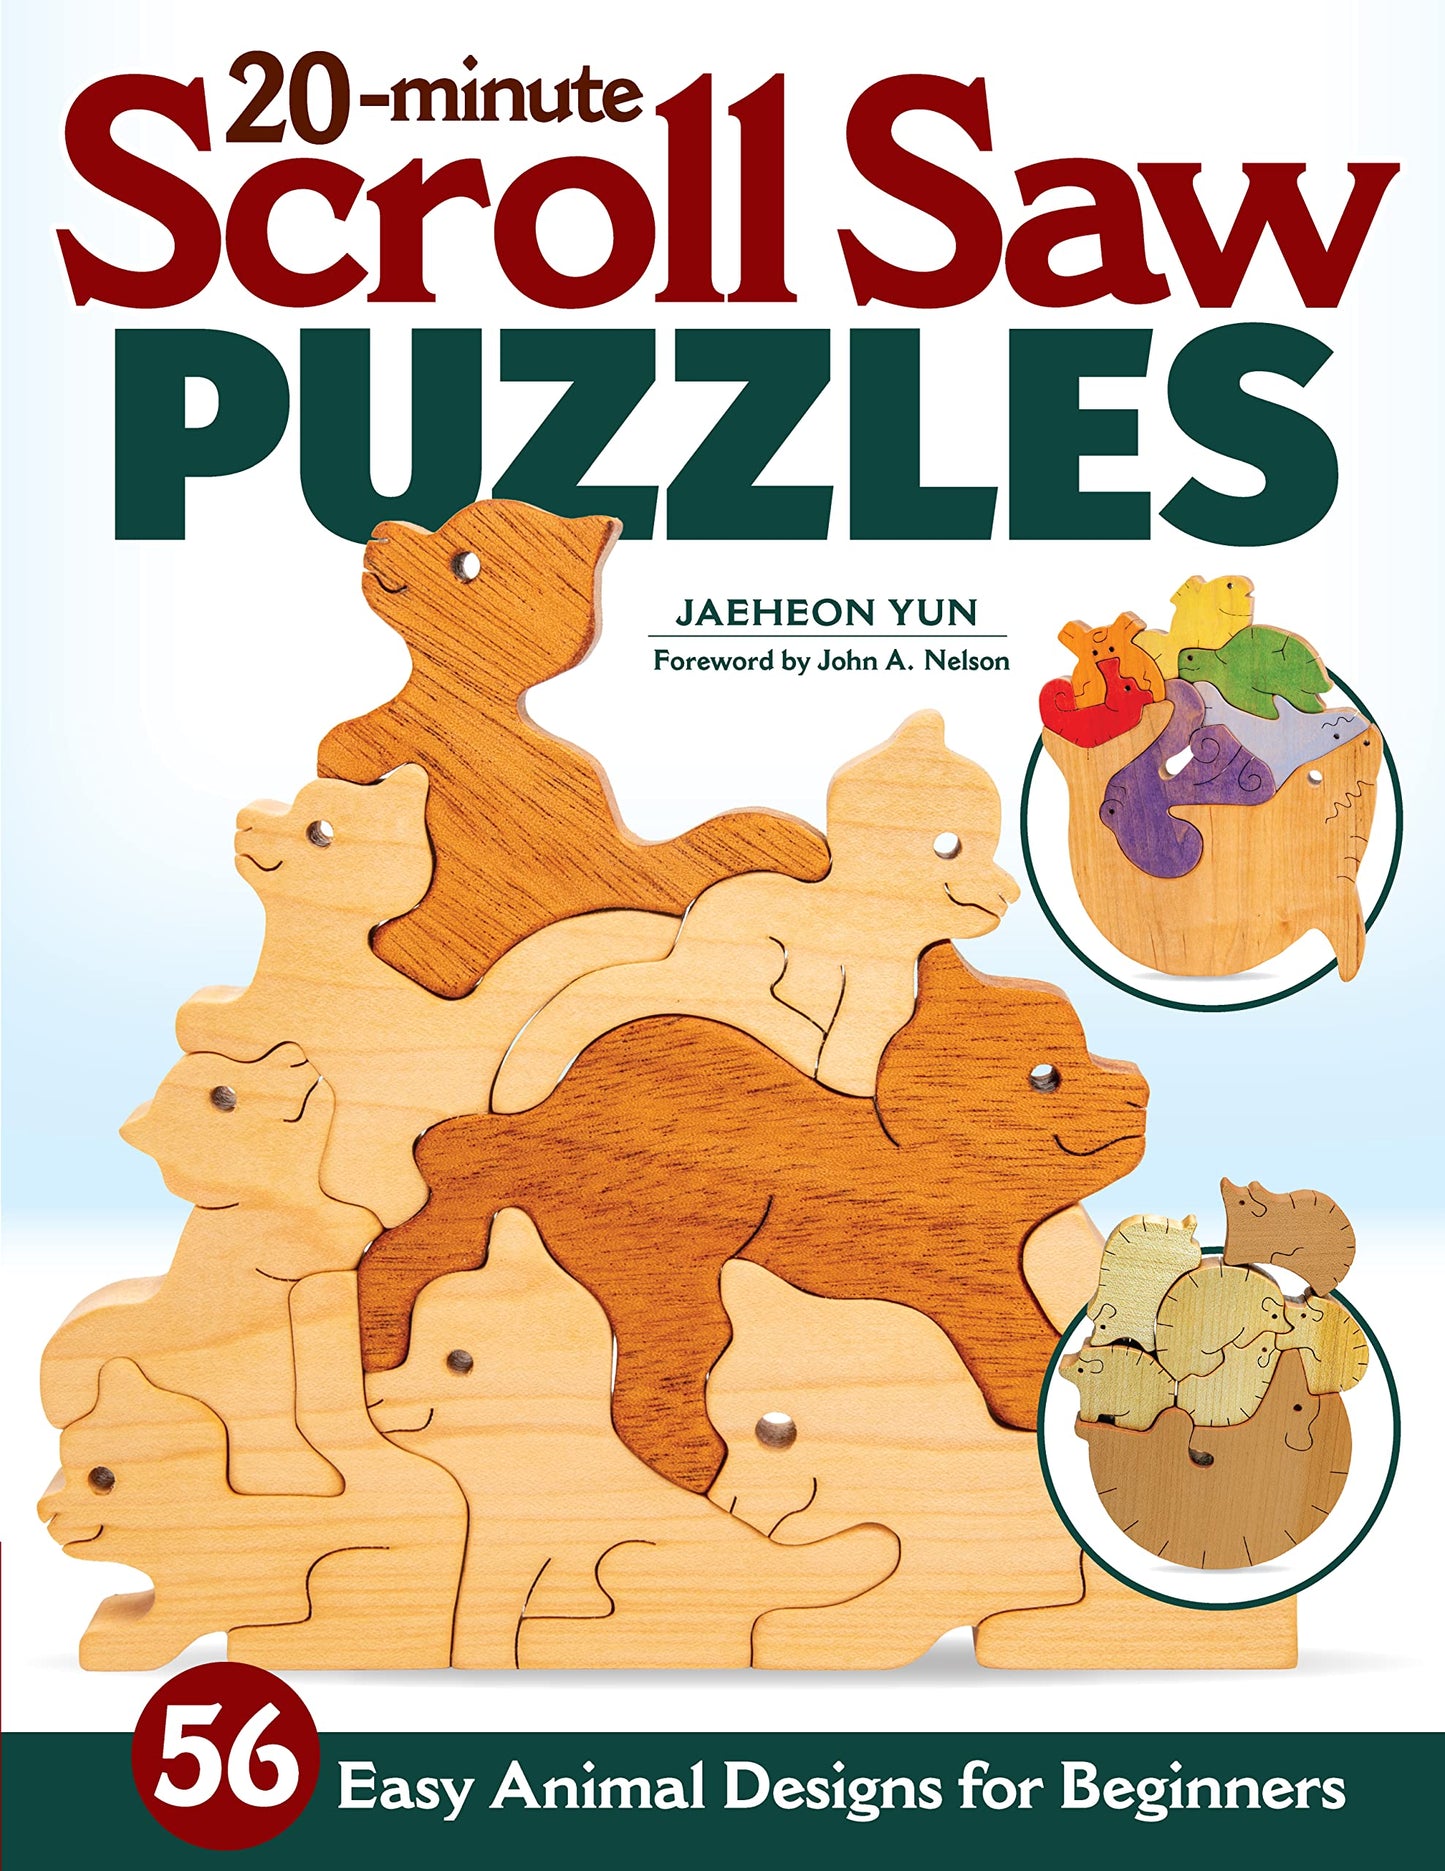 20-Minute Scroll Saw Puzzles: 56 Easy Animal Designs for Beginners (Fox Chapel Publishing) Woodworking Patterns for Interlocking Stackable Toys for